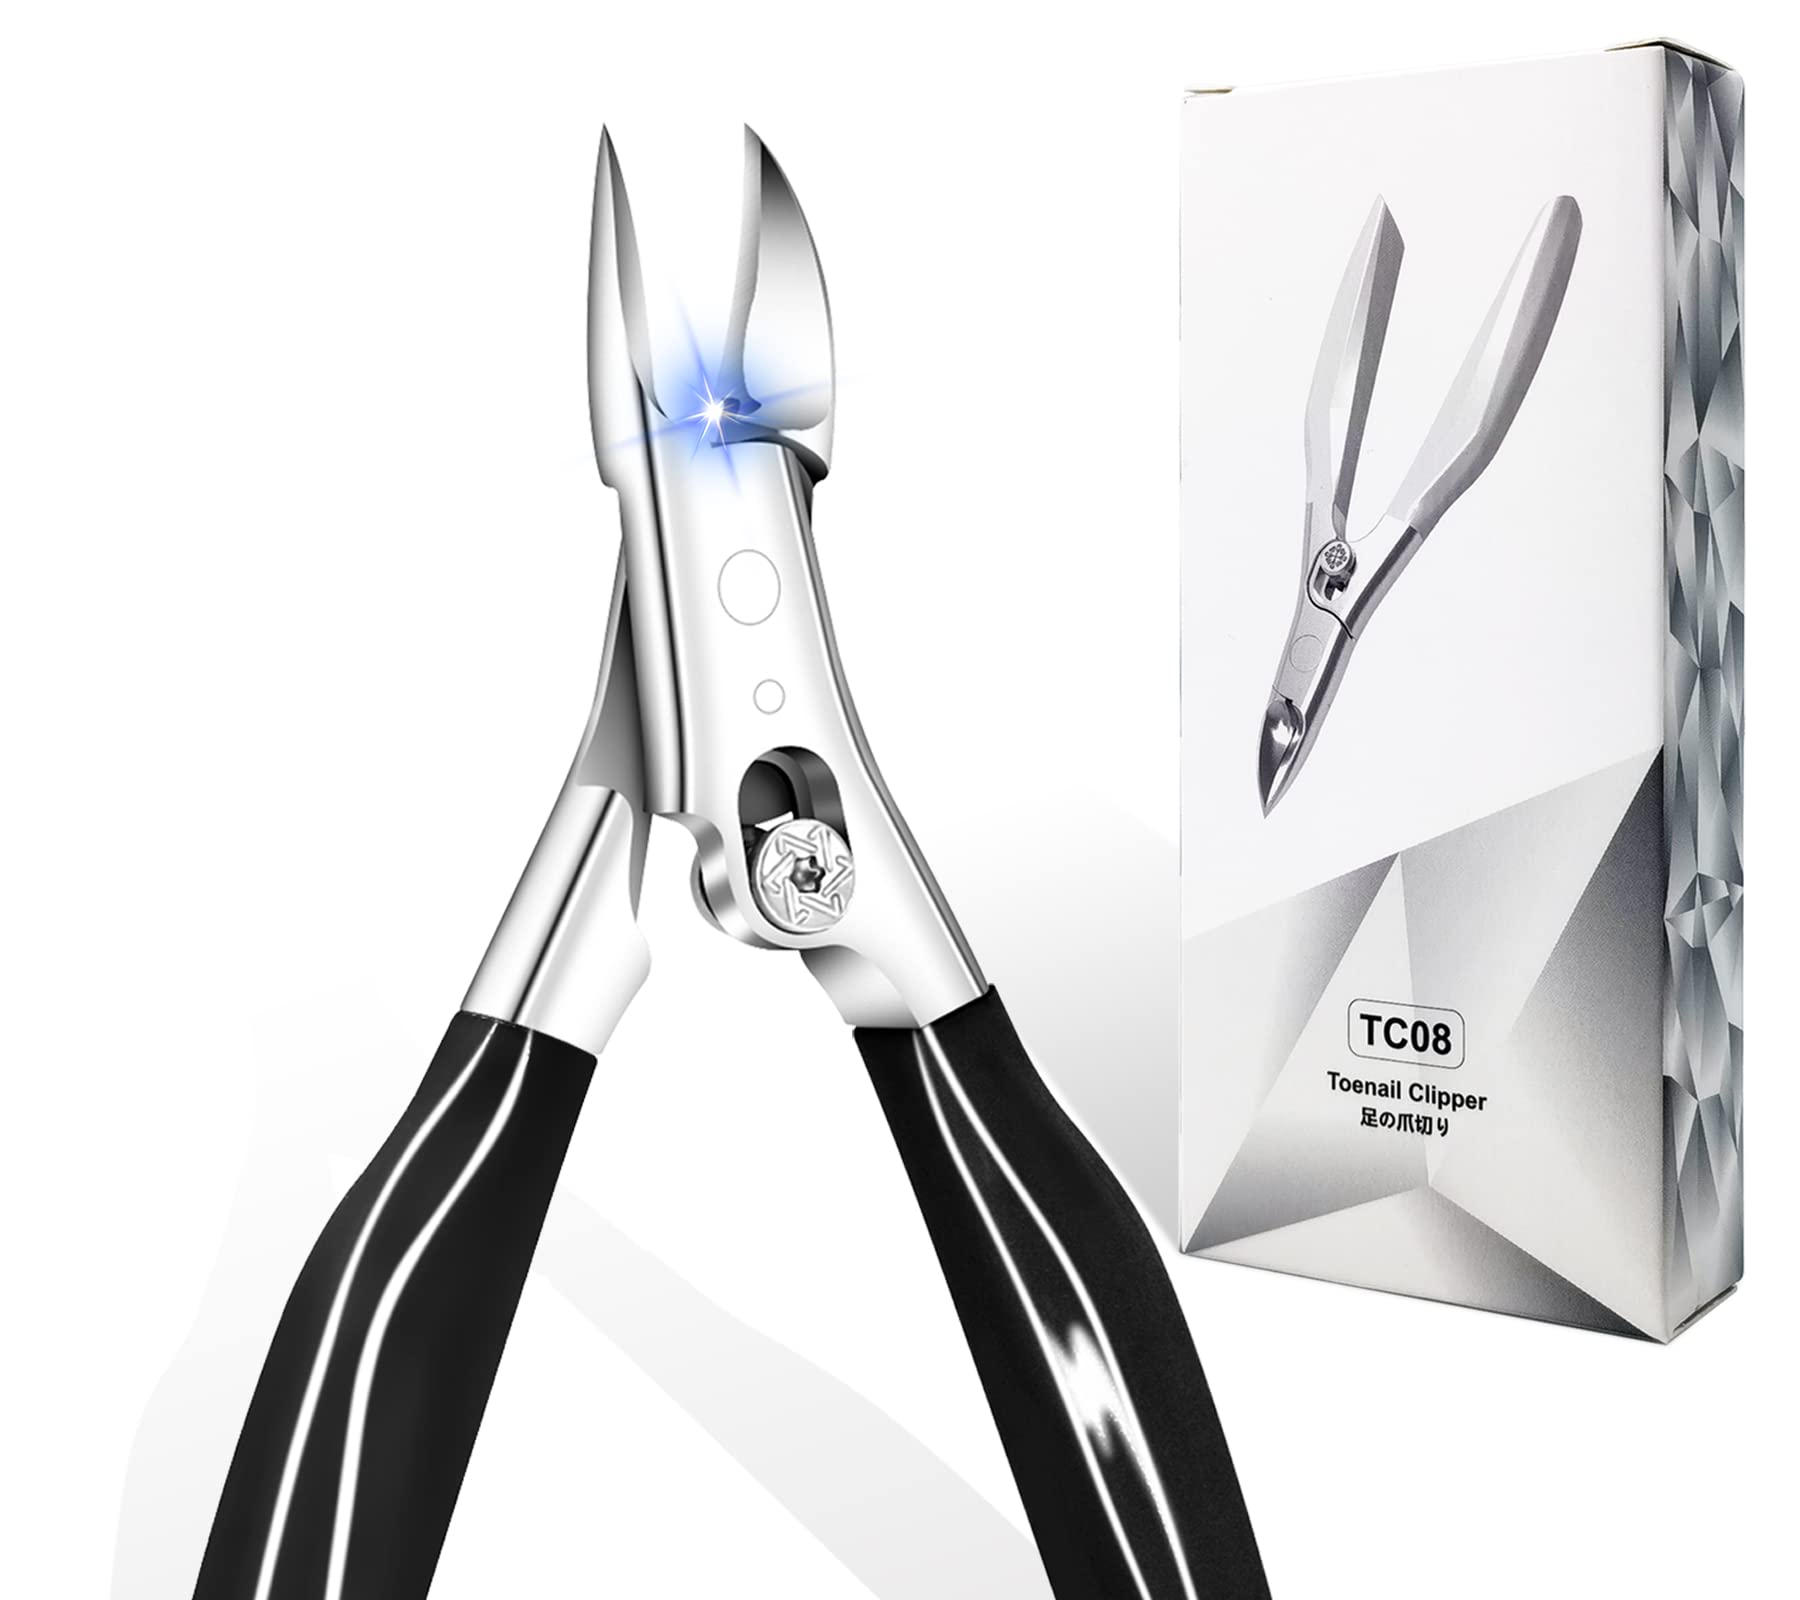 Ingrown Toenail Cutter,Heavy Duty Toe Nail Clippers for Thick  Toenails,Fingernails,Podiatrist Toenail Nippers with Sharp Blade,Safe Lock